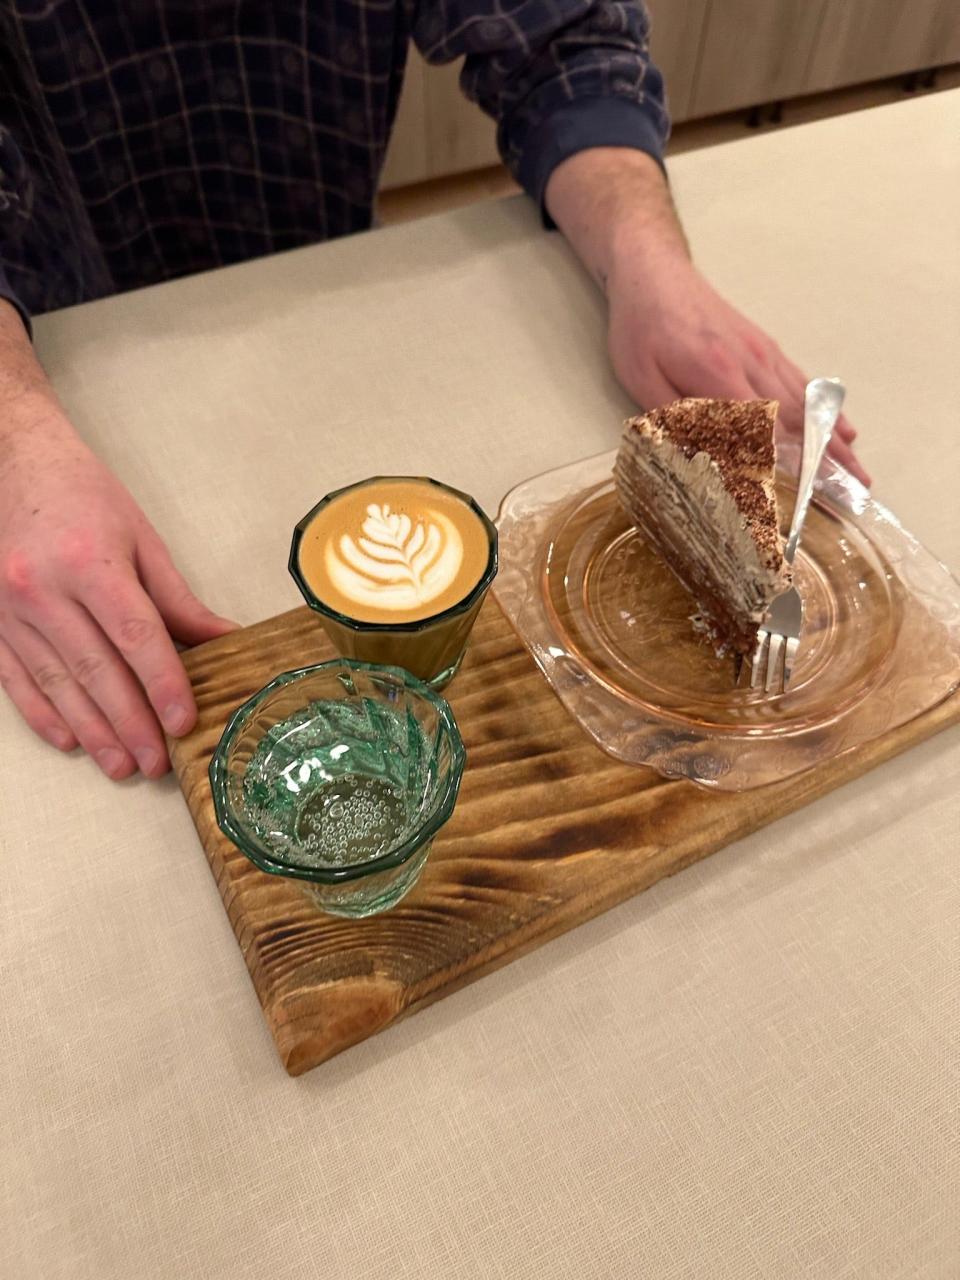 The menu at Wynnsome Cake and Tea in Columbia features a variety of teas, tea lattes, espresso drinks and cake by the slice.